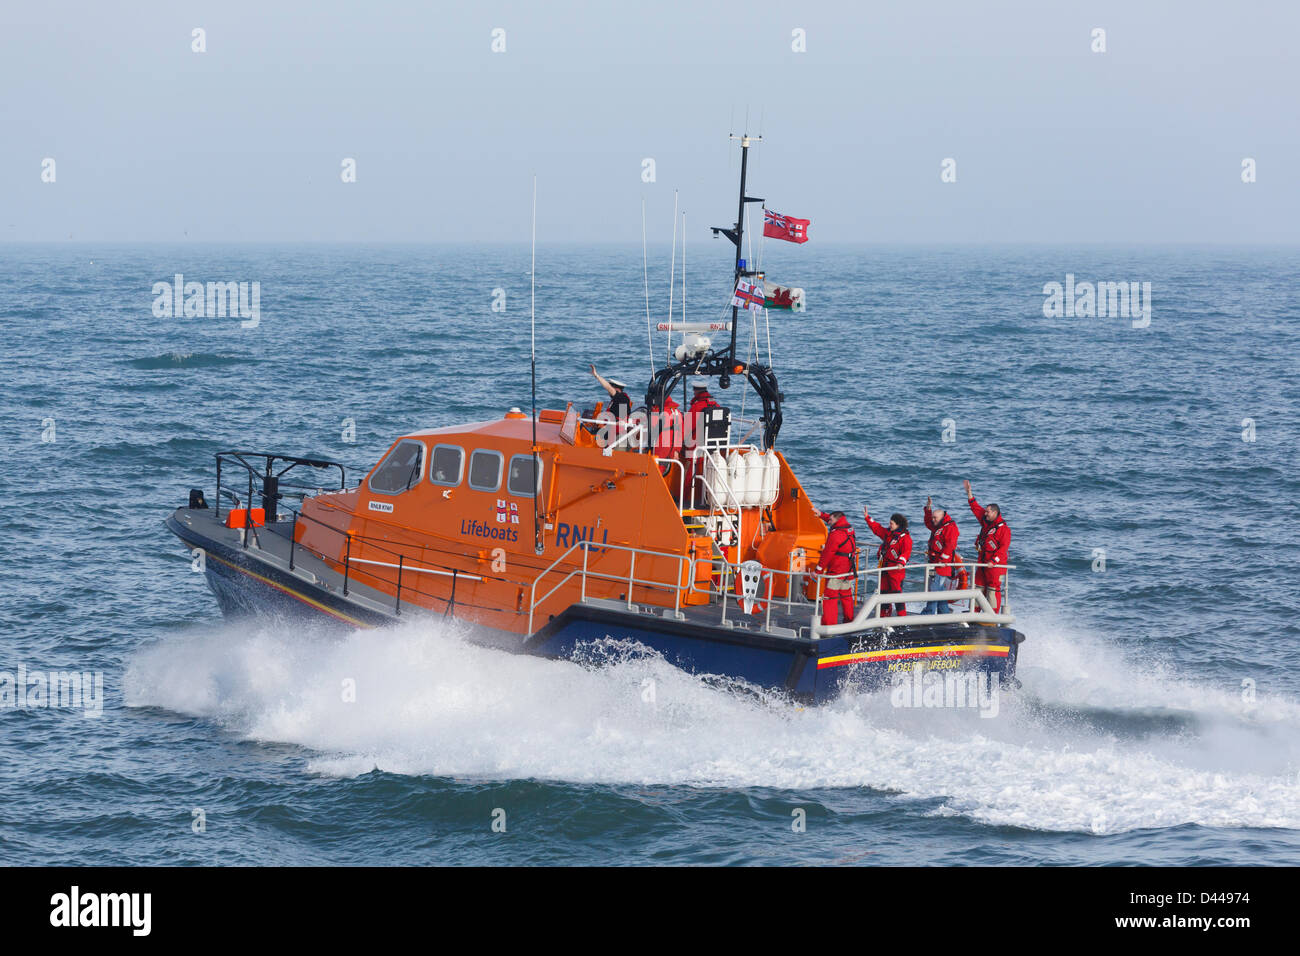 Moelfre, Isle of Anglesey, Wales, UK, Mon 4th March 2013. RNLI lifeboat crew wave to the welcoming crowd from the new £2.7 million Tamar class vessel 'Kiwi' funded by the bequest of a New Zealand seaman Reginald James Clark. The bigger and safer boat replaces the Tyne class vessel which has been in service since 1988. Stock Photo